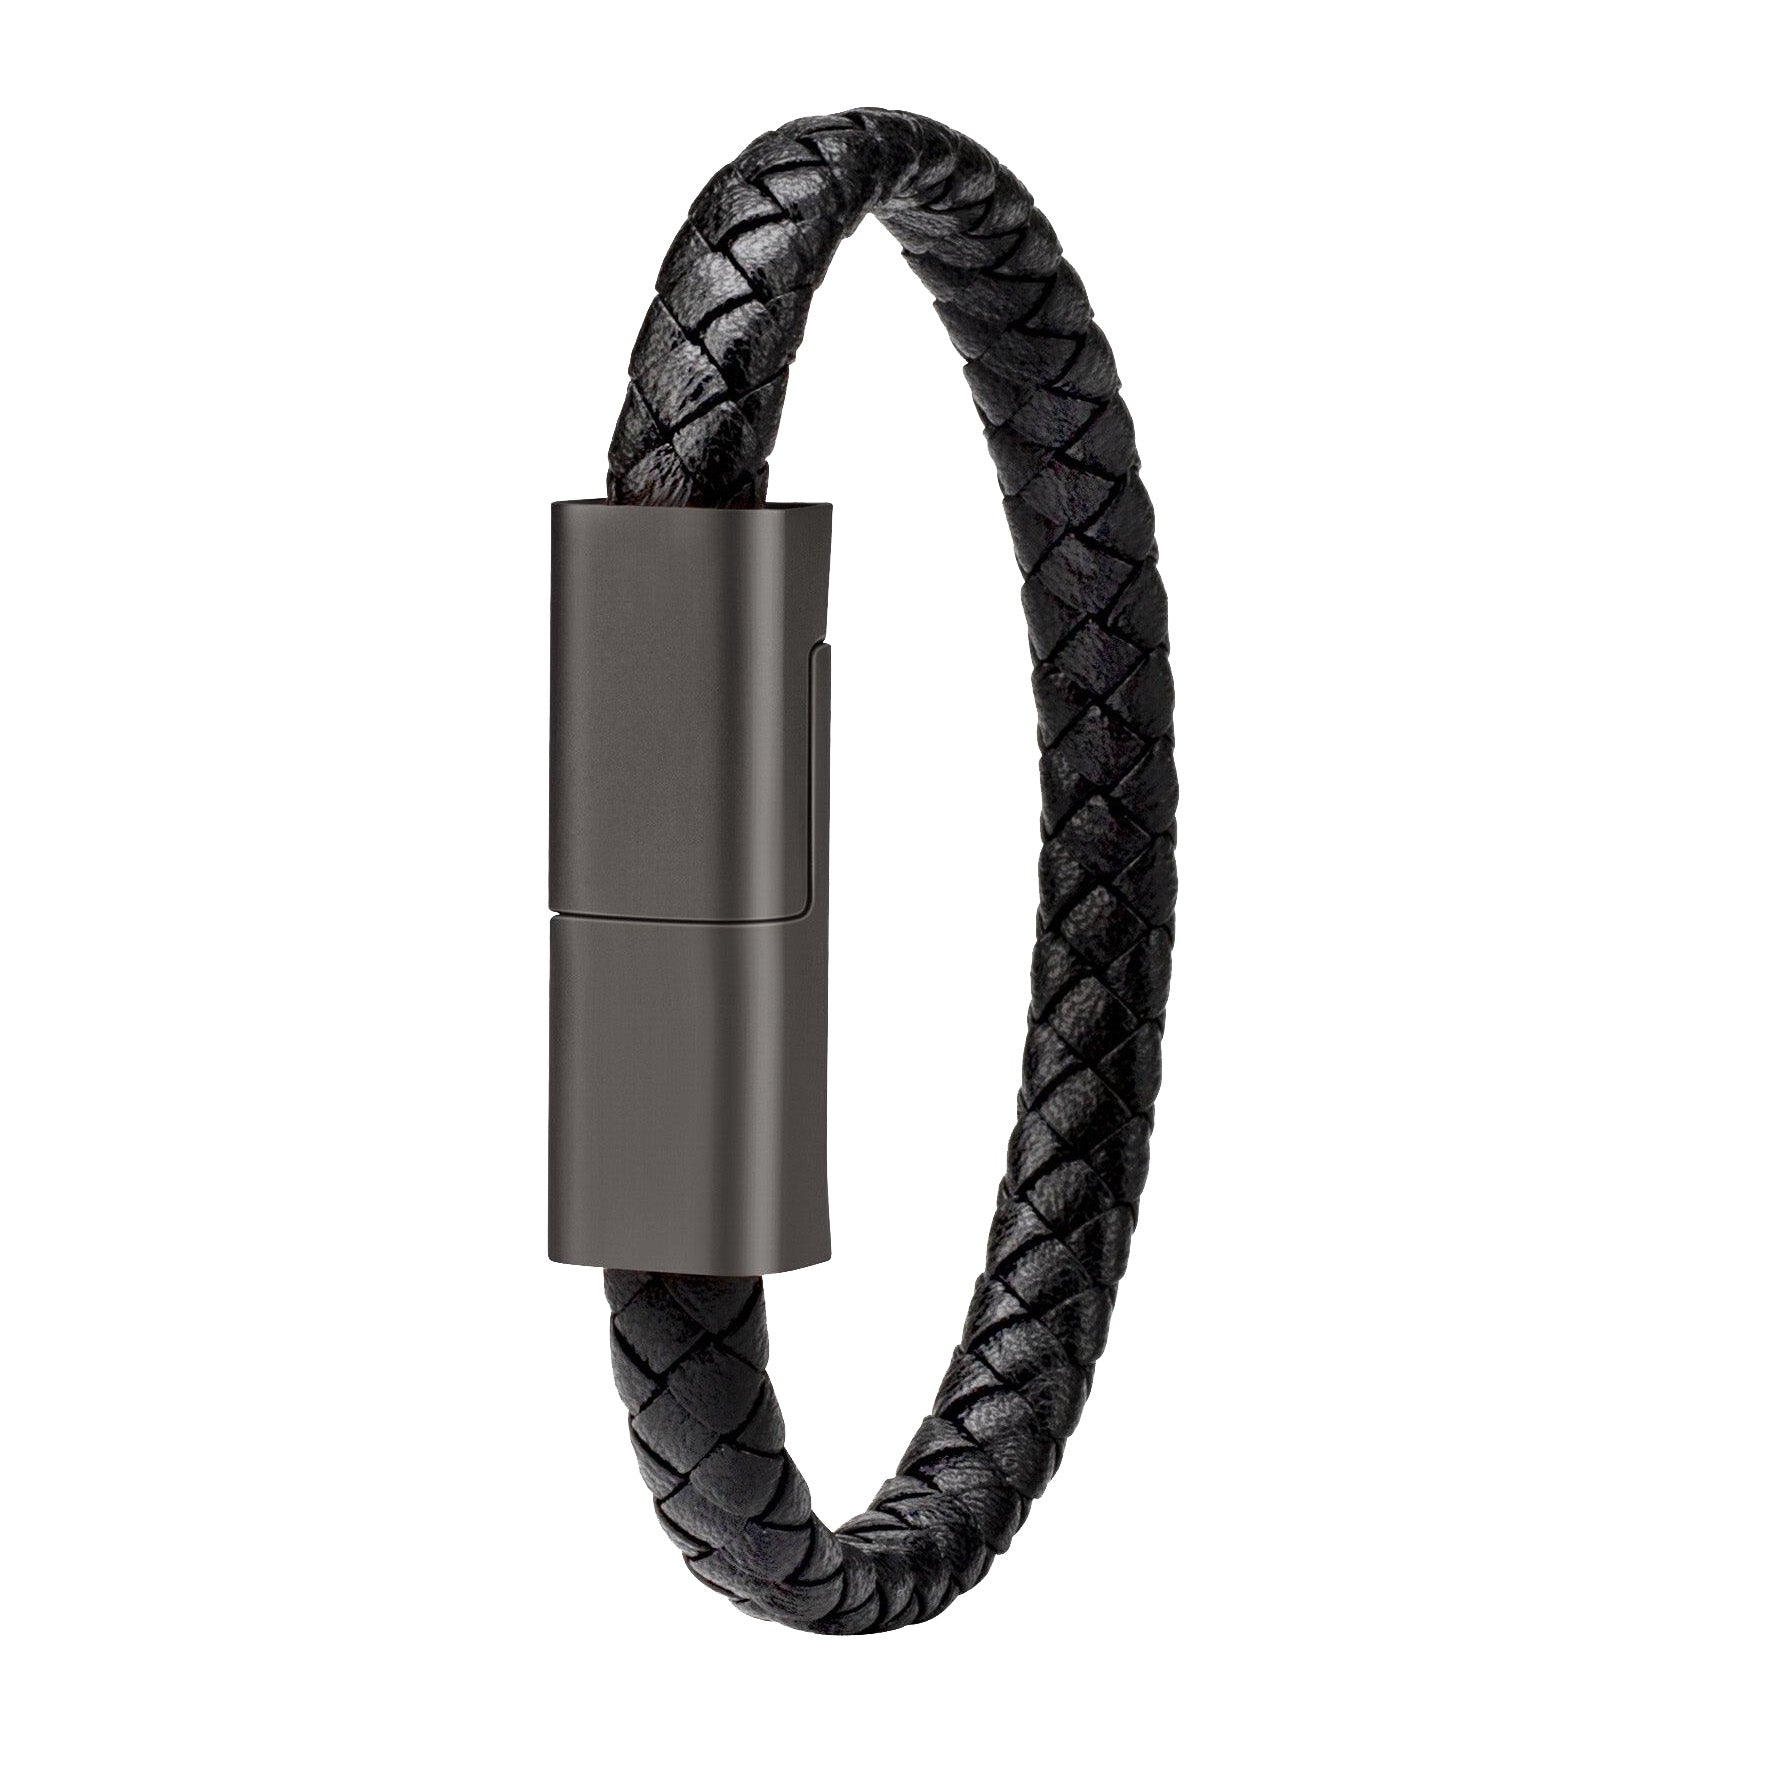 Wholesale USB Bracelet Charger for dropshipping From malibabacom